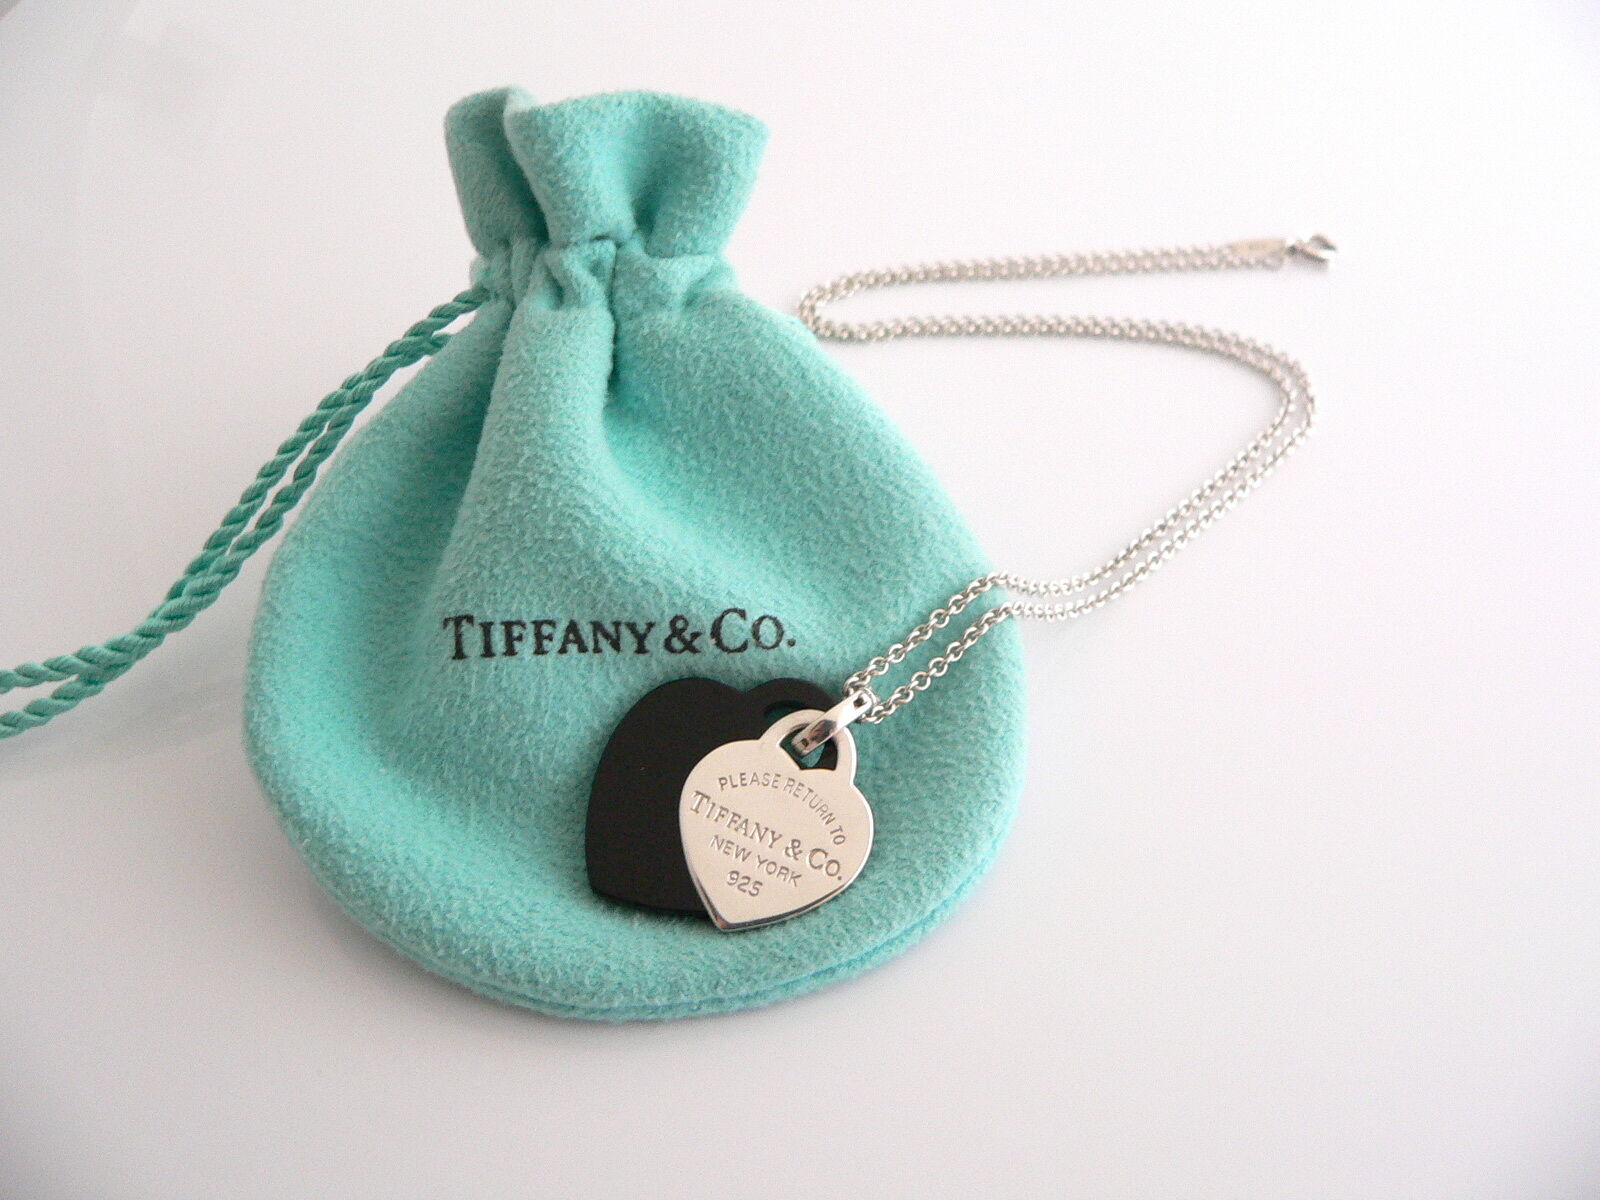 Tiffany & Co Silver Onyx Gemstone Heart Necklace Pendant 18 In Chain Gift  Love